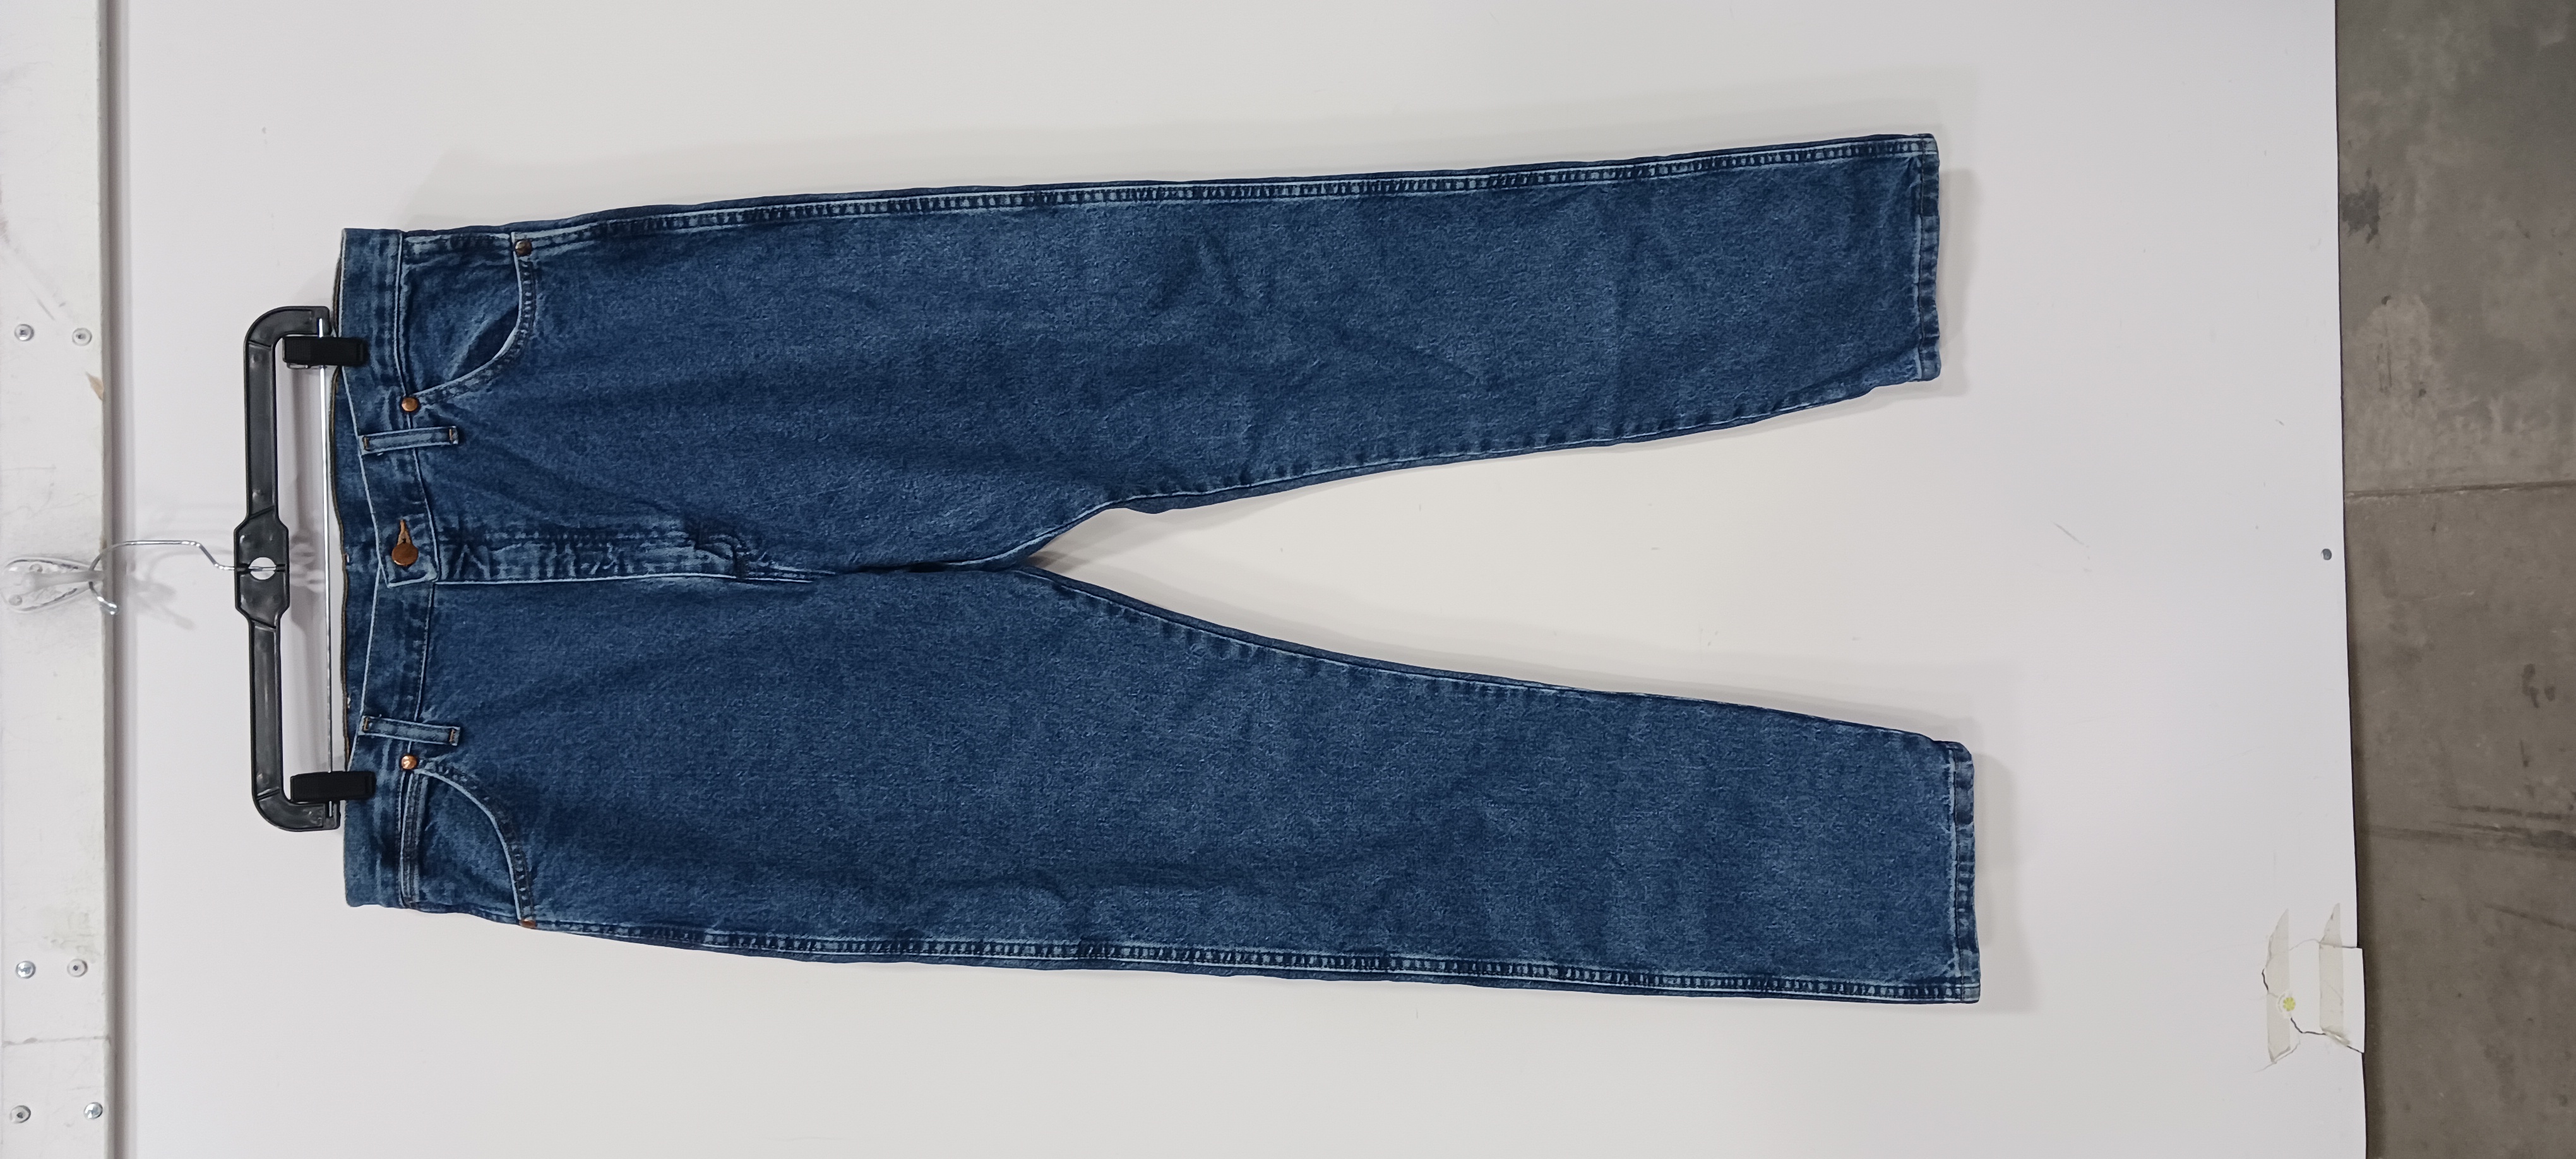 Buy the Men's Blue Jeans Size 38x36 | GoodwillFinds